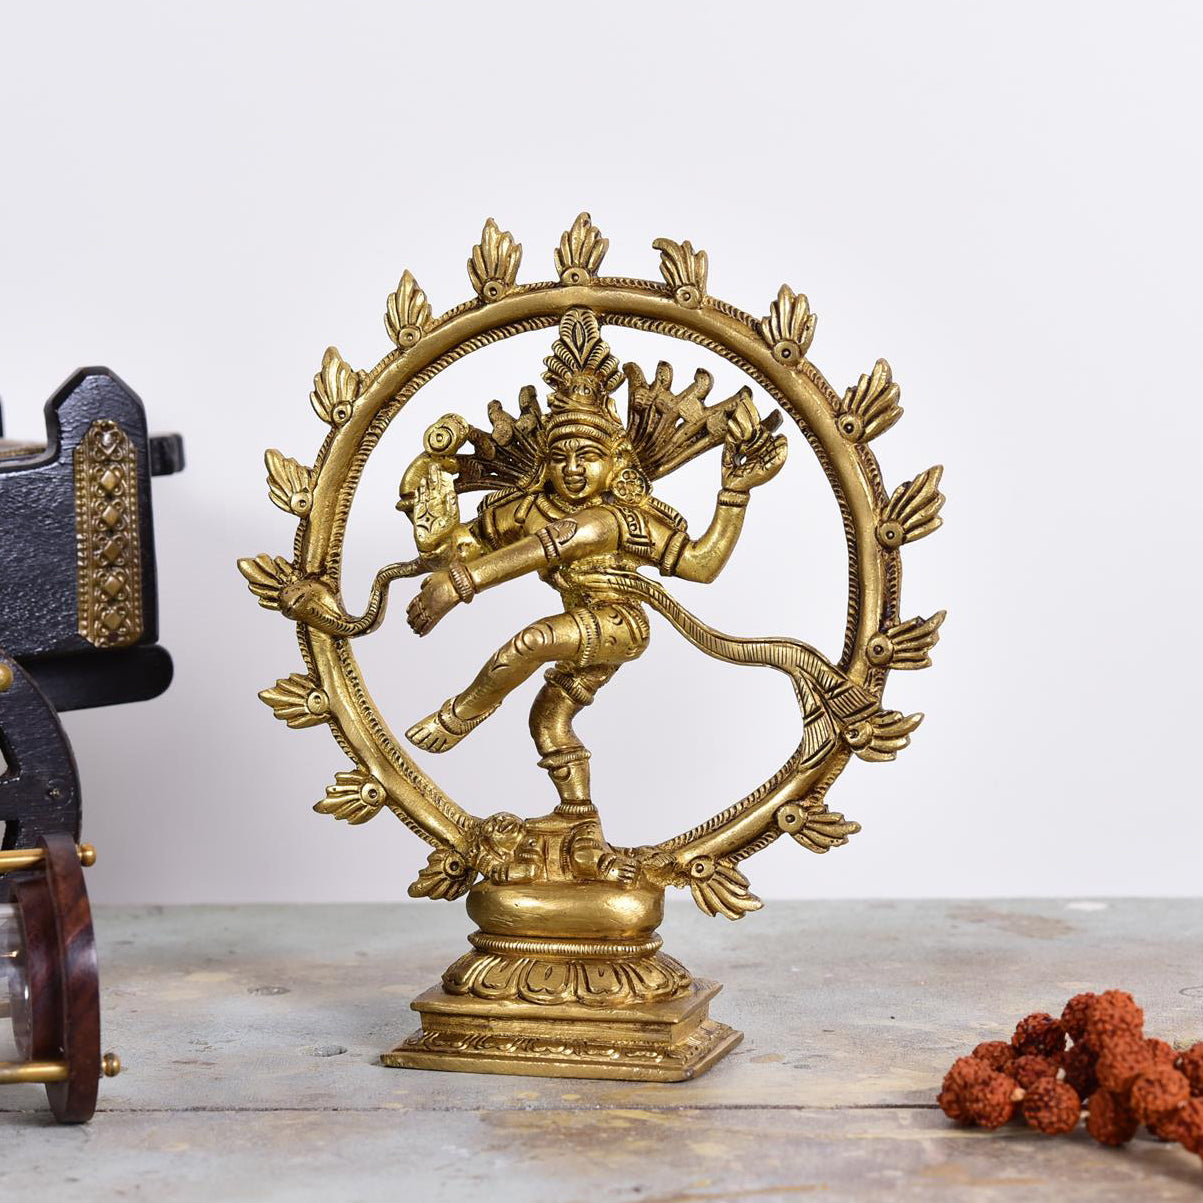 All You Need To Know About the Nataraja - Dancing Shiva